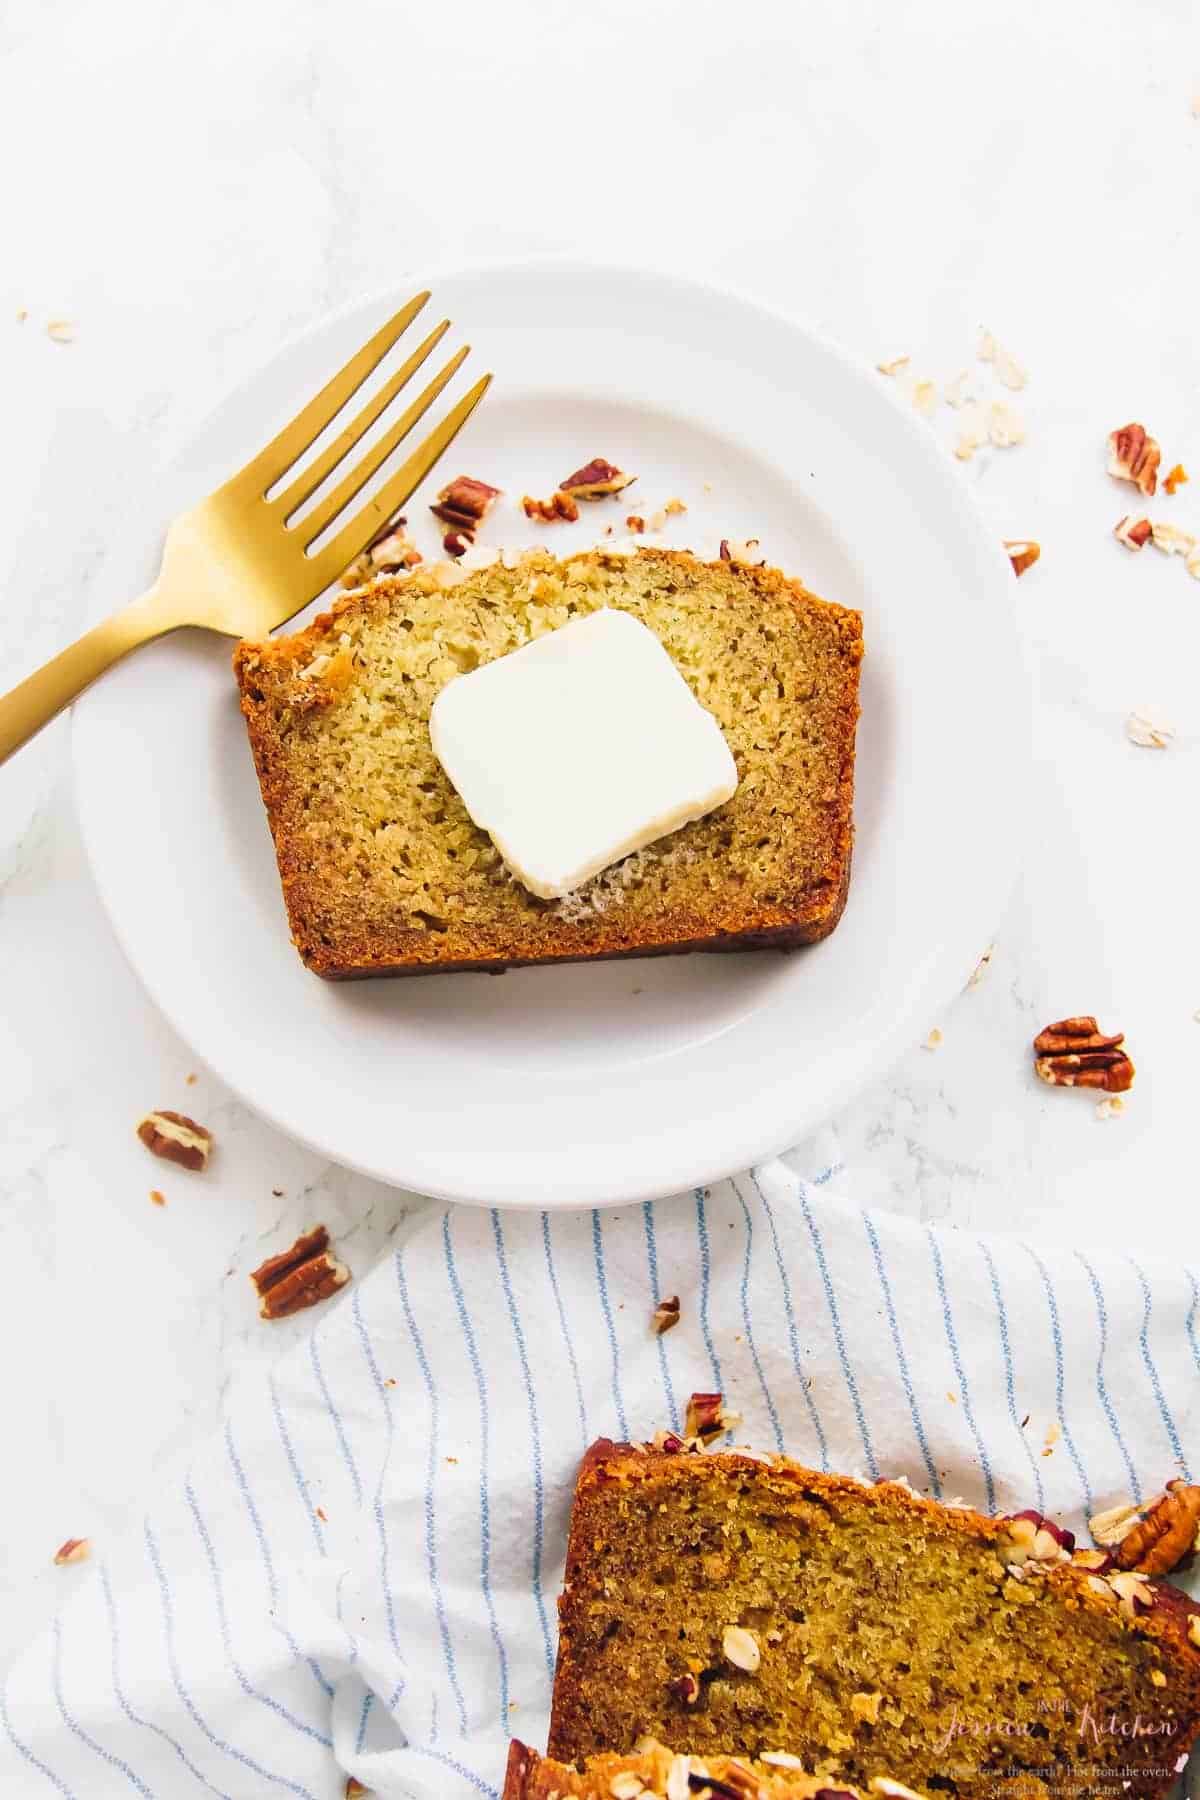 Overhead view of gluten-free vegan banana bread slice on plate with pat of butter